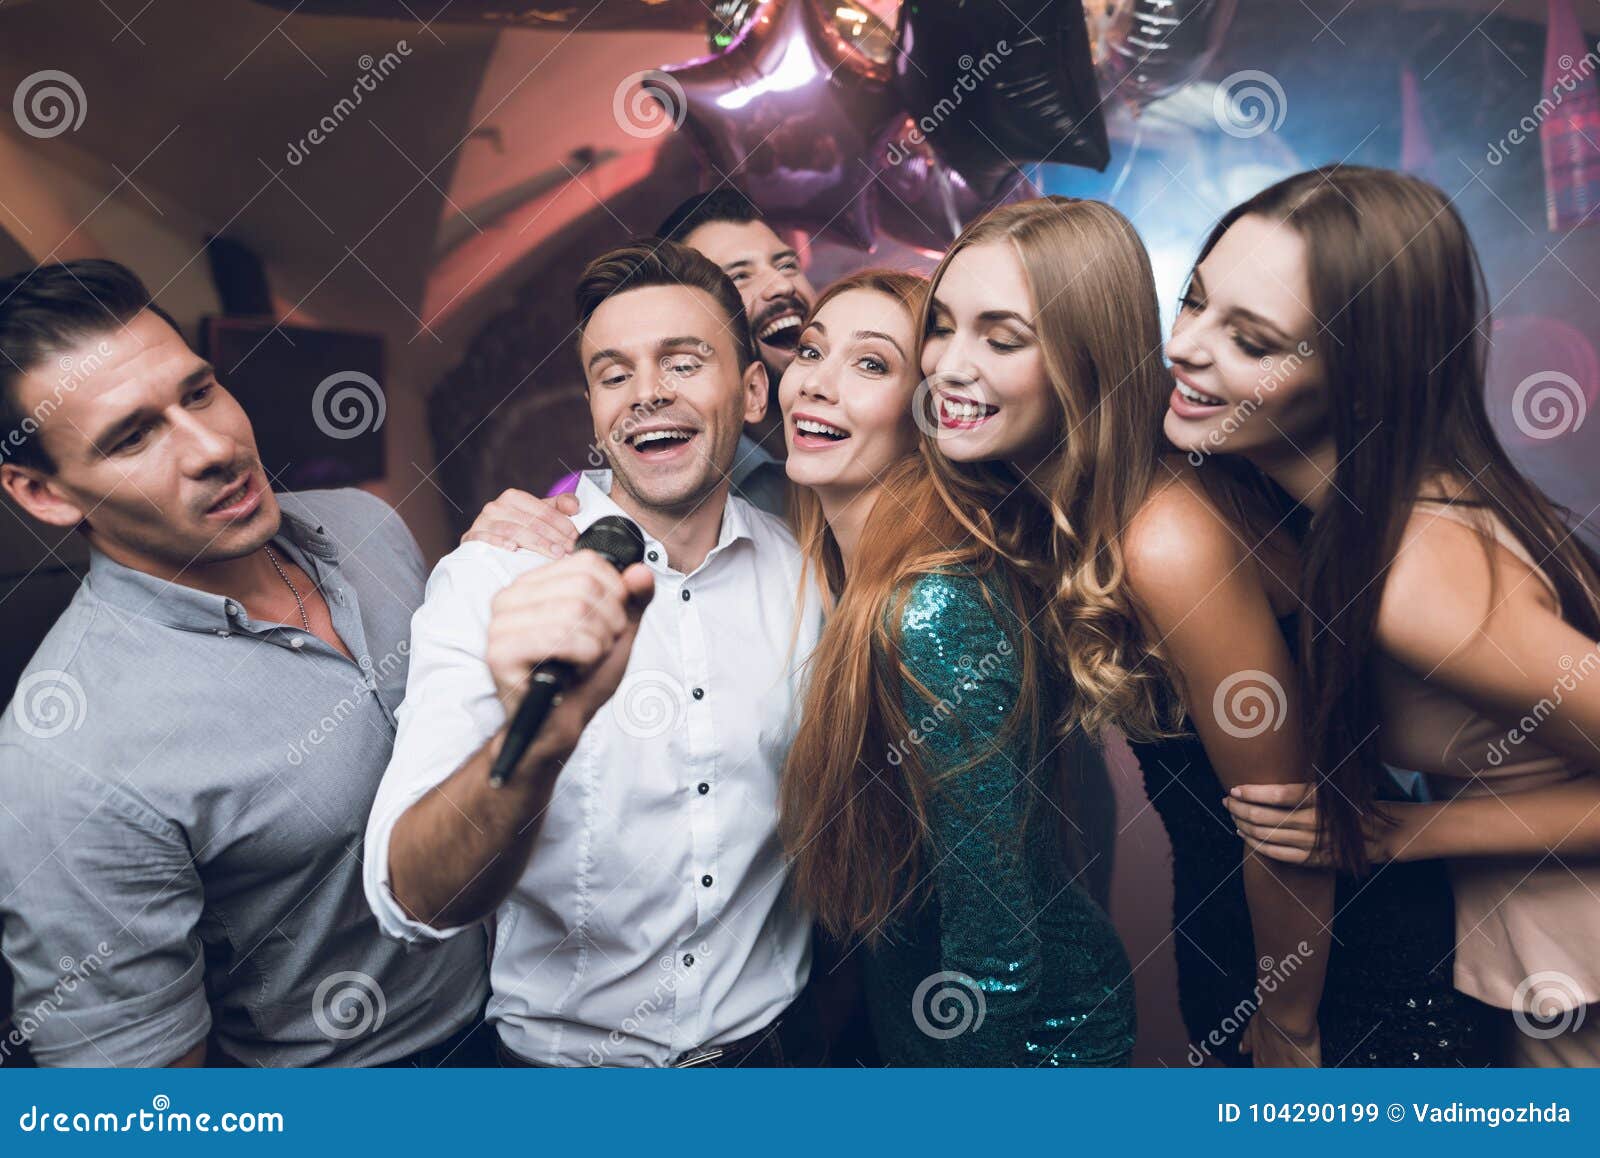 Young People in the Club Dance and Sing. a Man in a White Shirt is ...